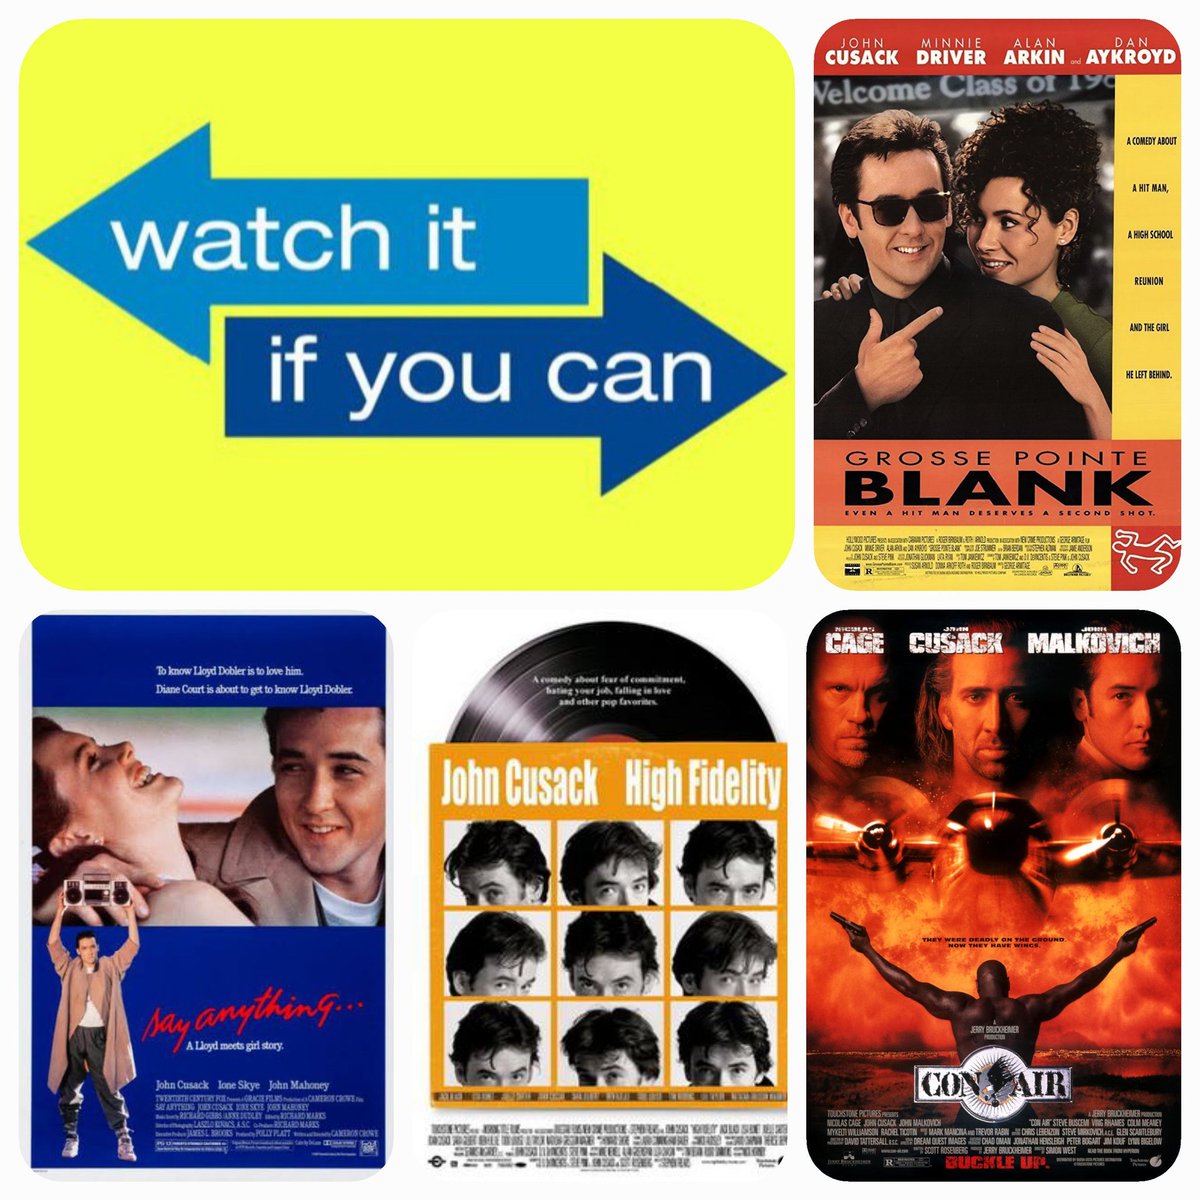 Some of our favourite movies featuring John Cusack. 

Any you haven't seen? Then maybe...
just maybe #watchitifyoucan